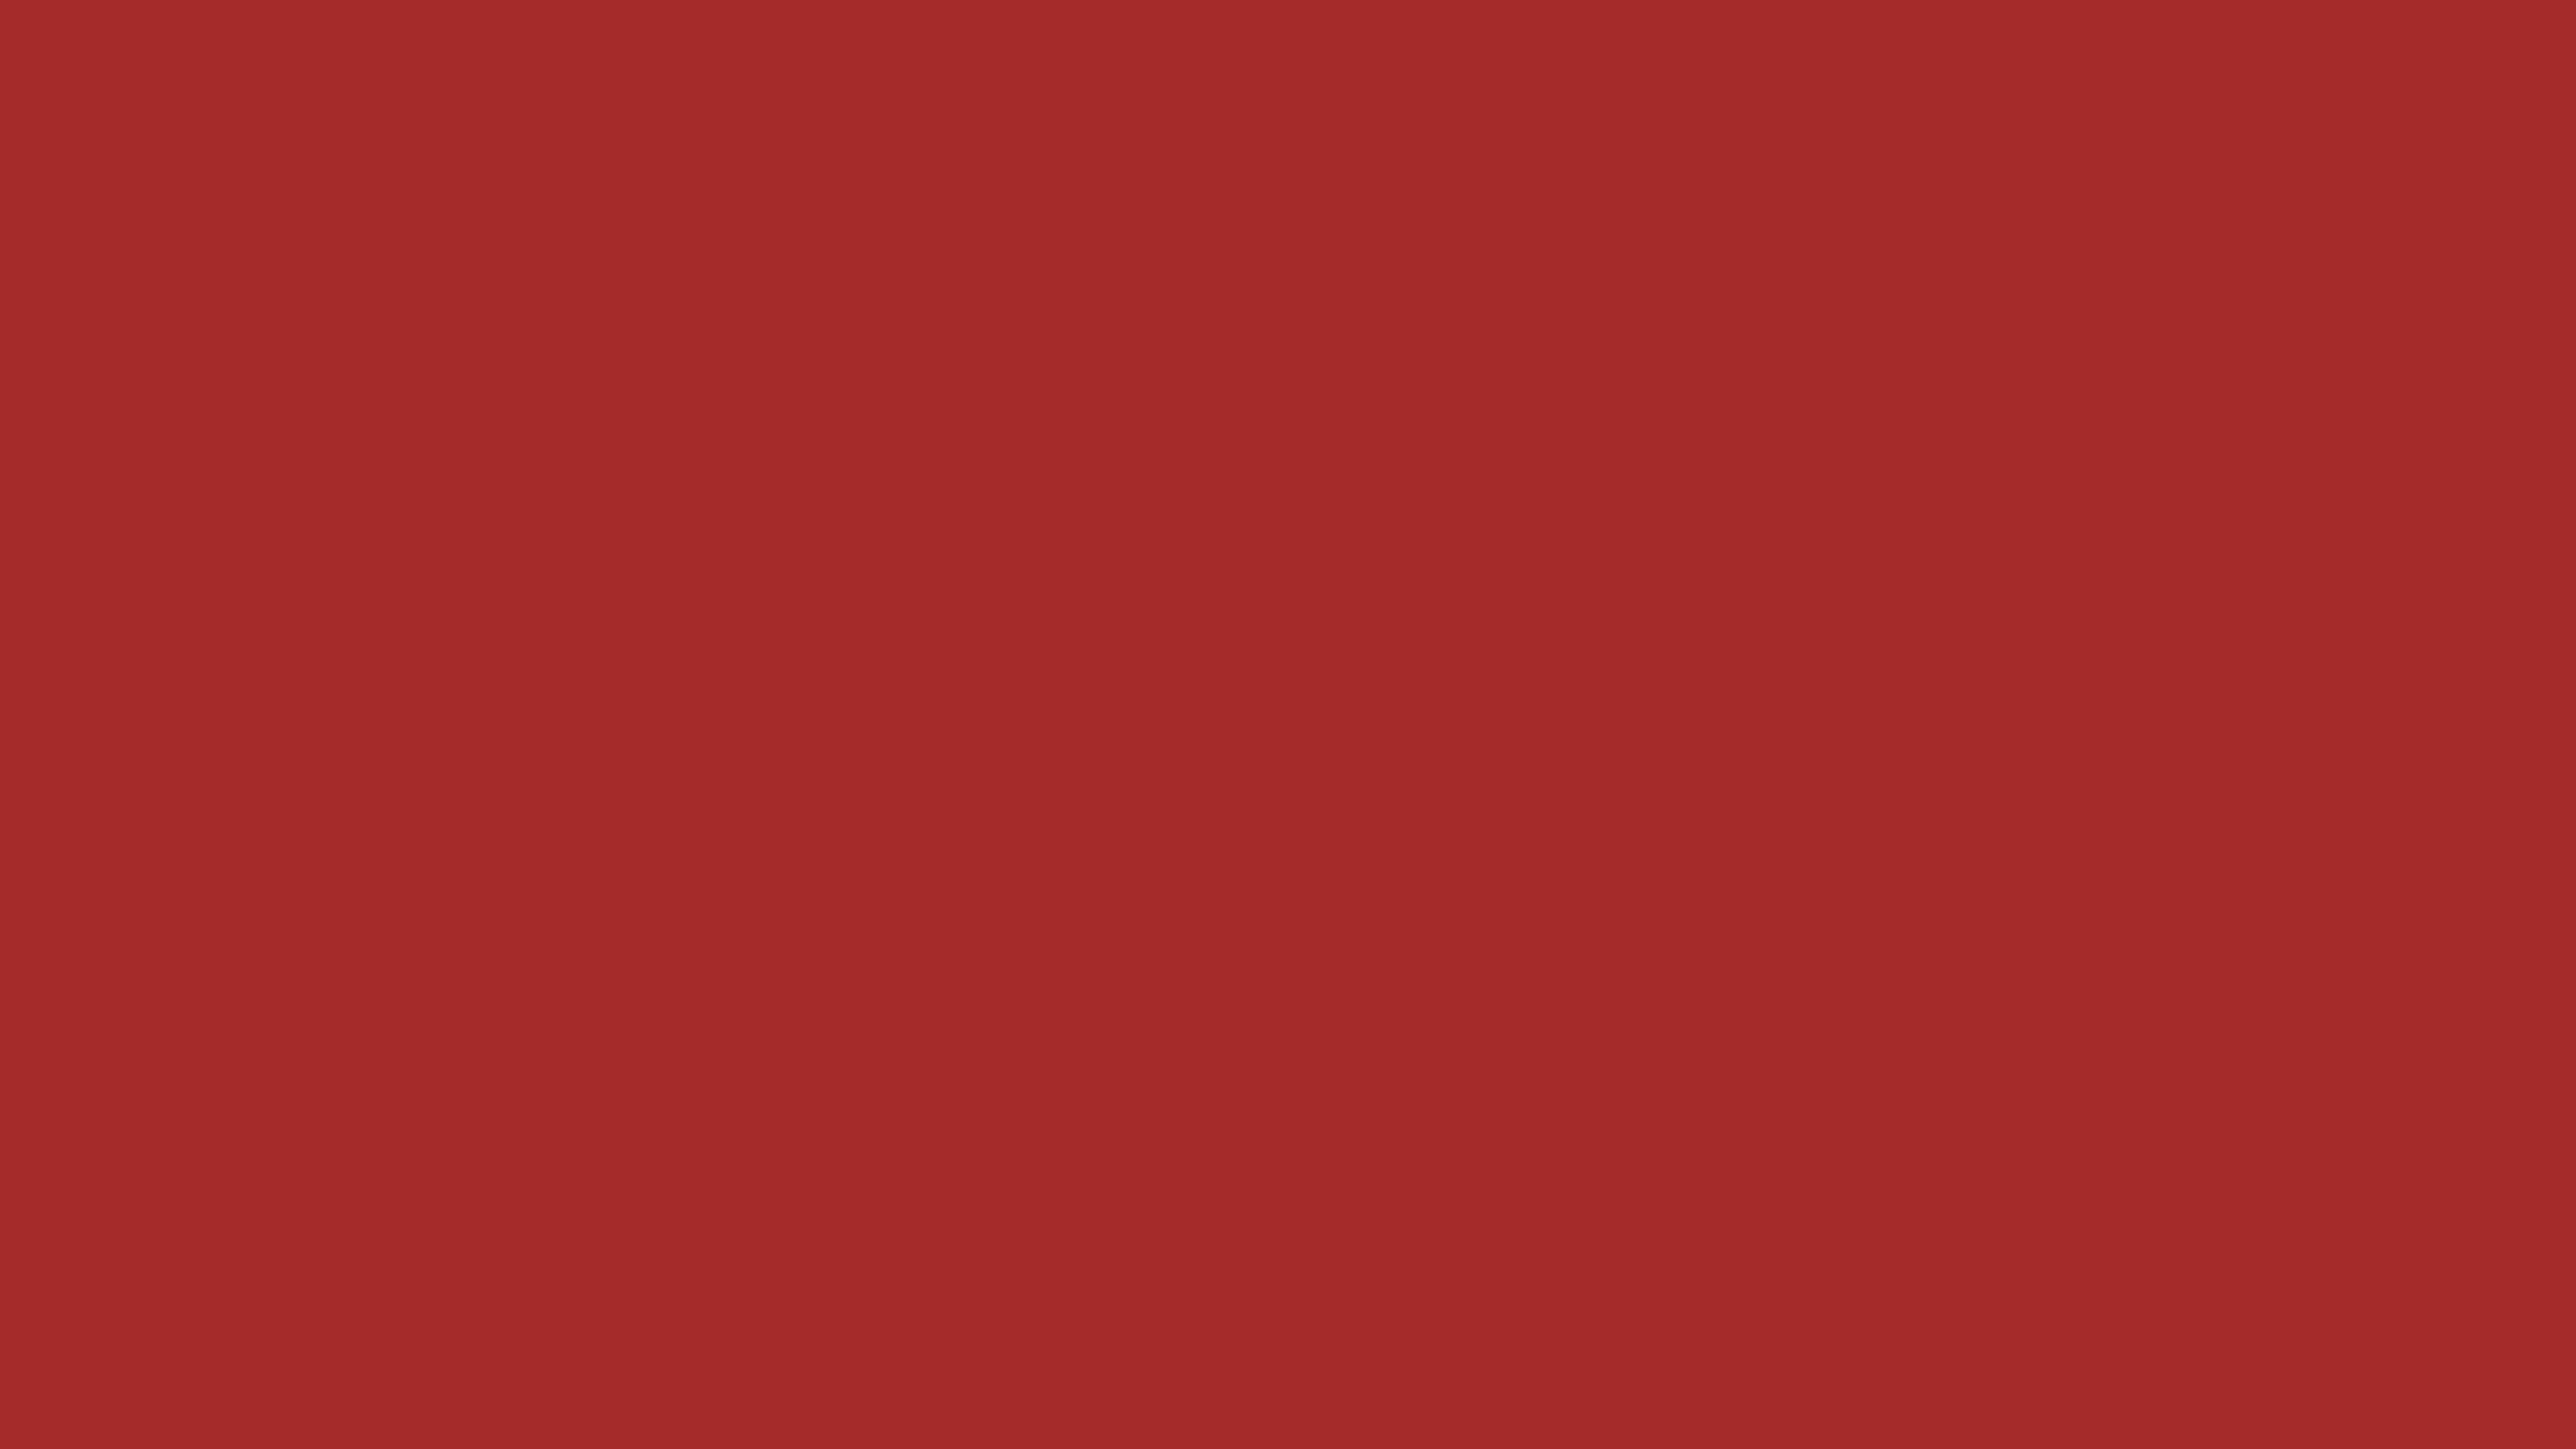 7680x4320 Red-brown Solid Color Background